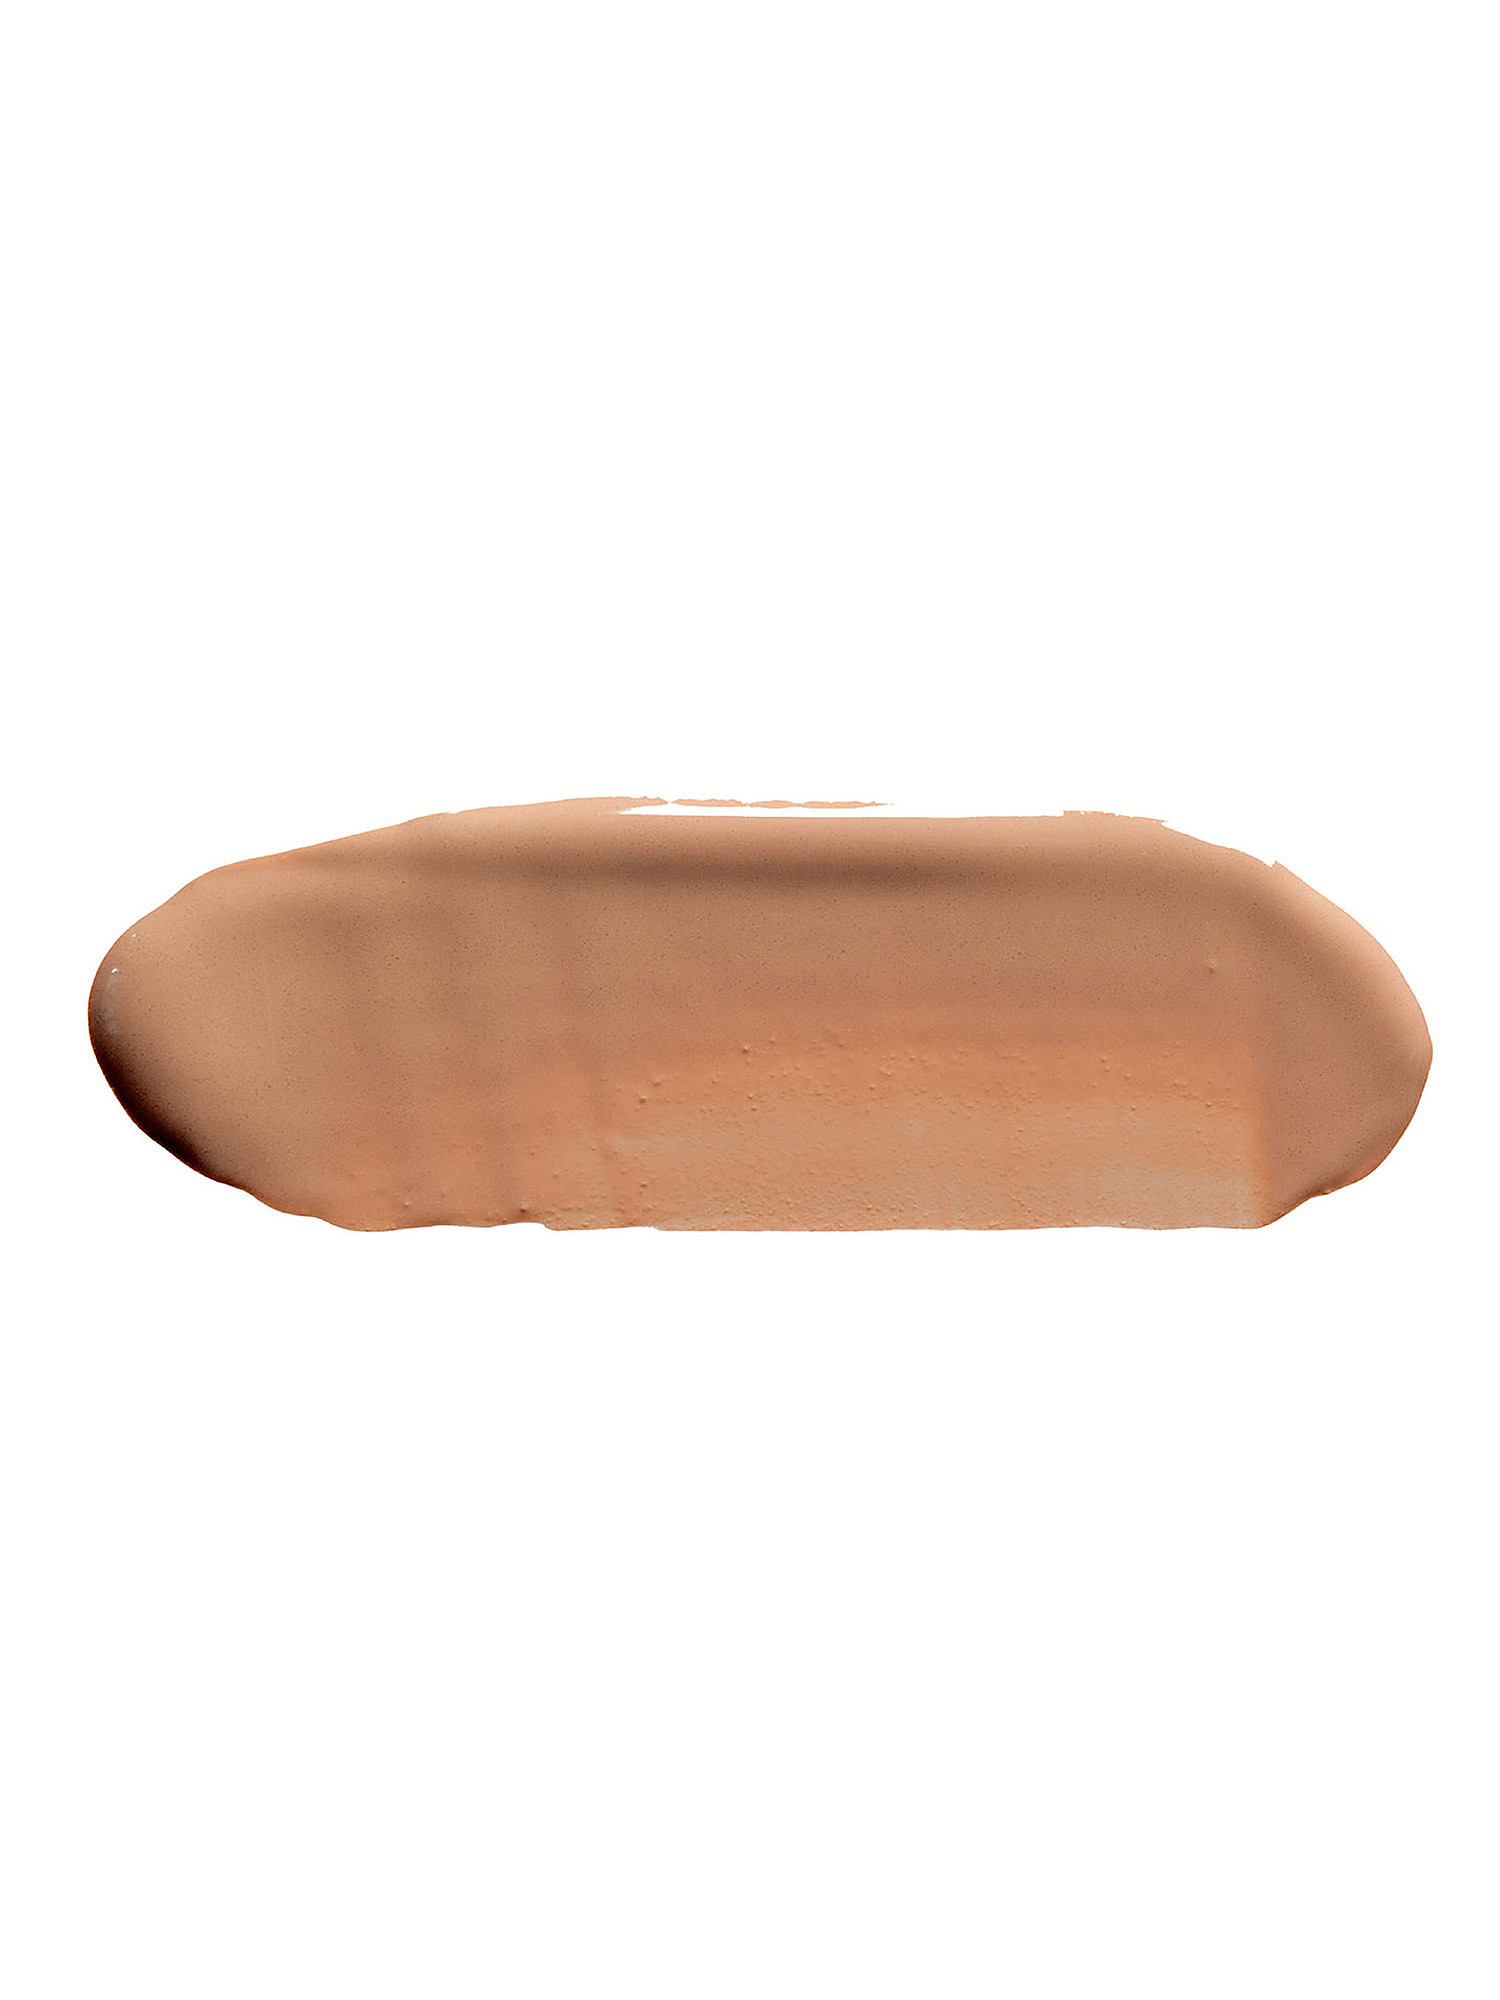 NUDISSIMO Naturally Matt Foundation - 249W, Bronze Brown, large image number 1